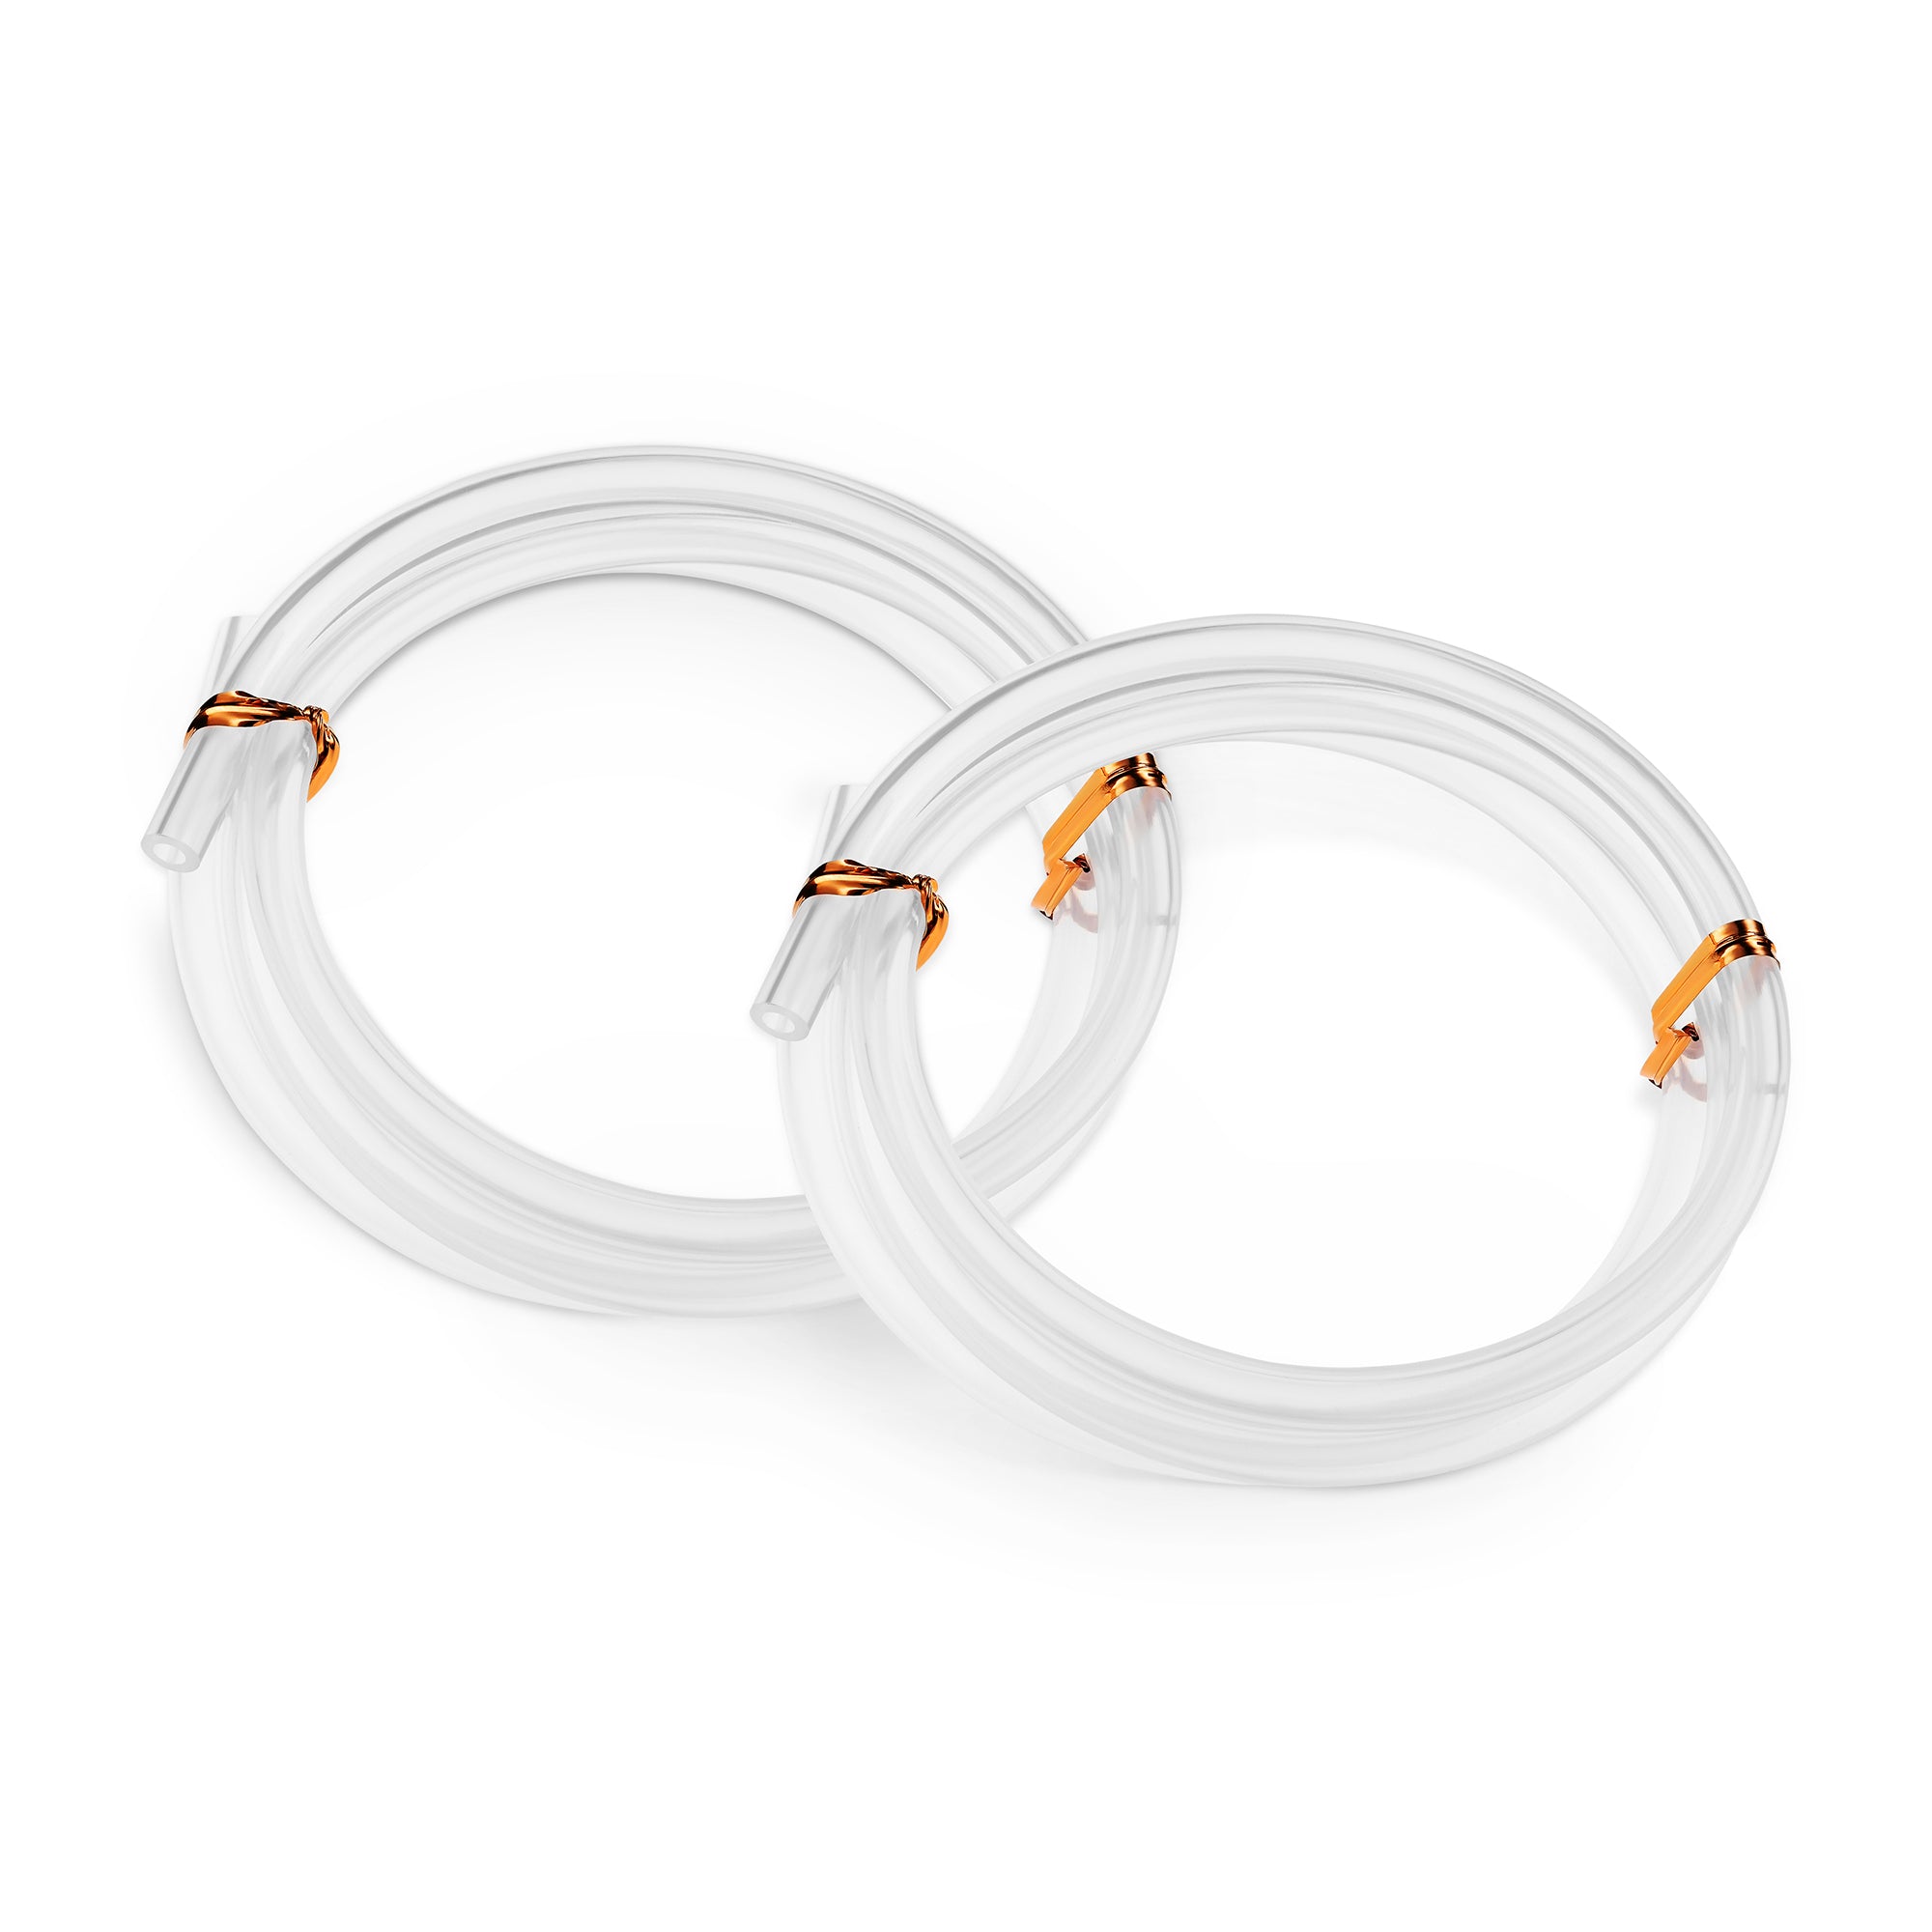 Spectra® CaraCups Wearable Milk Collection Hands-Free Inserts - 24mm